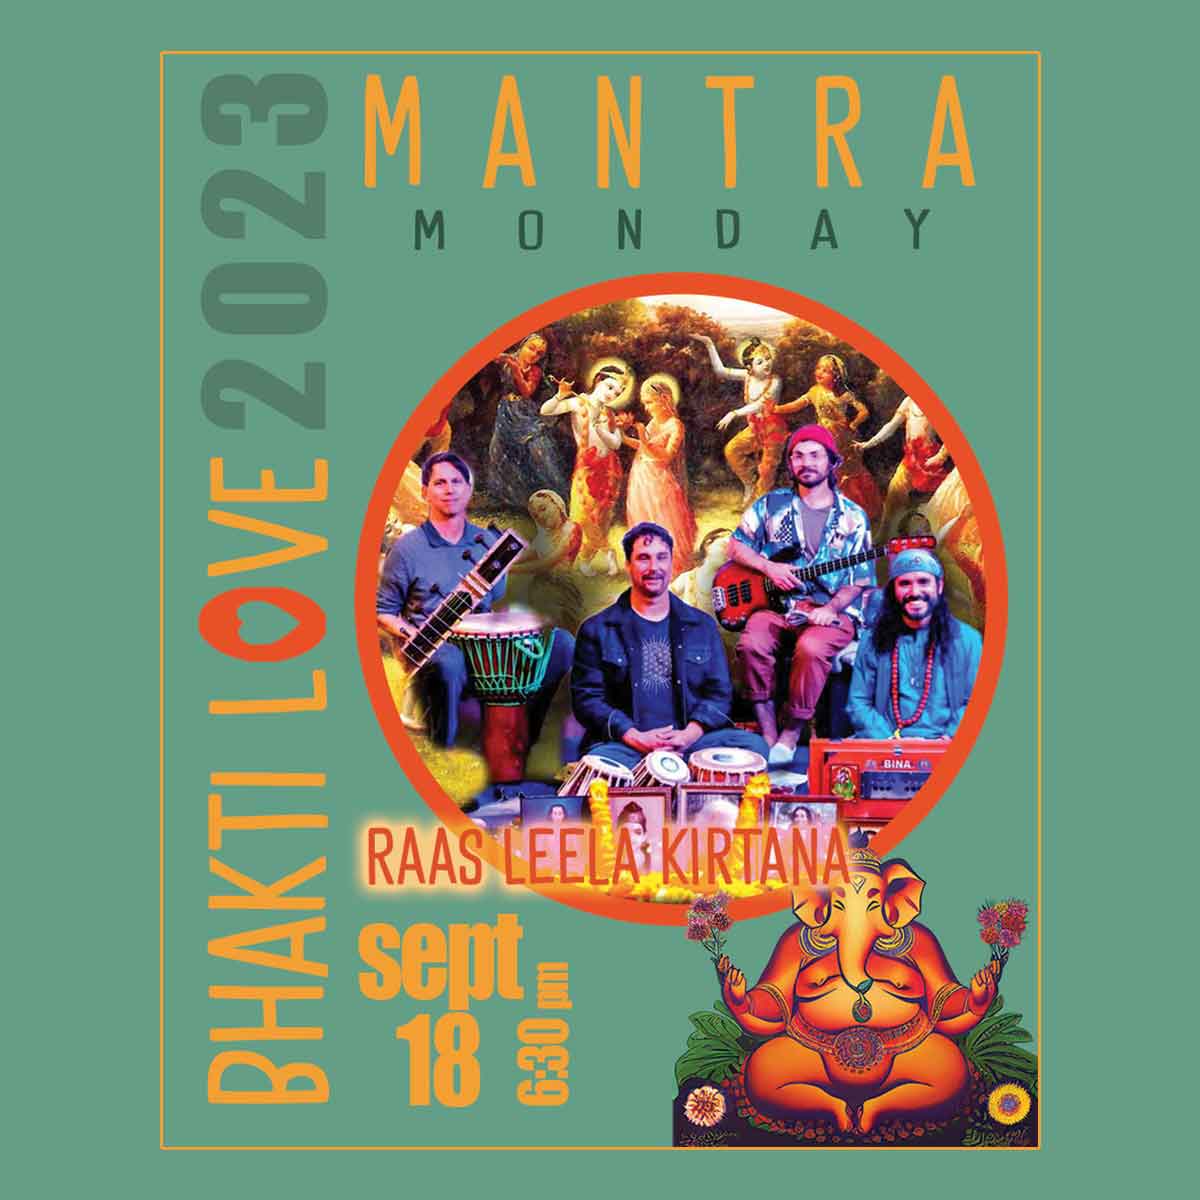 Mantra Monday Featuring Raas Leela Kirtan - Event Poster Featured Image